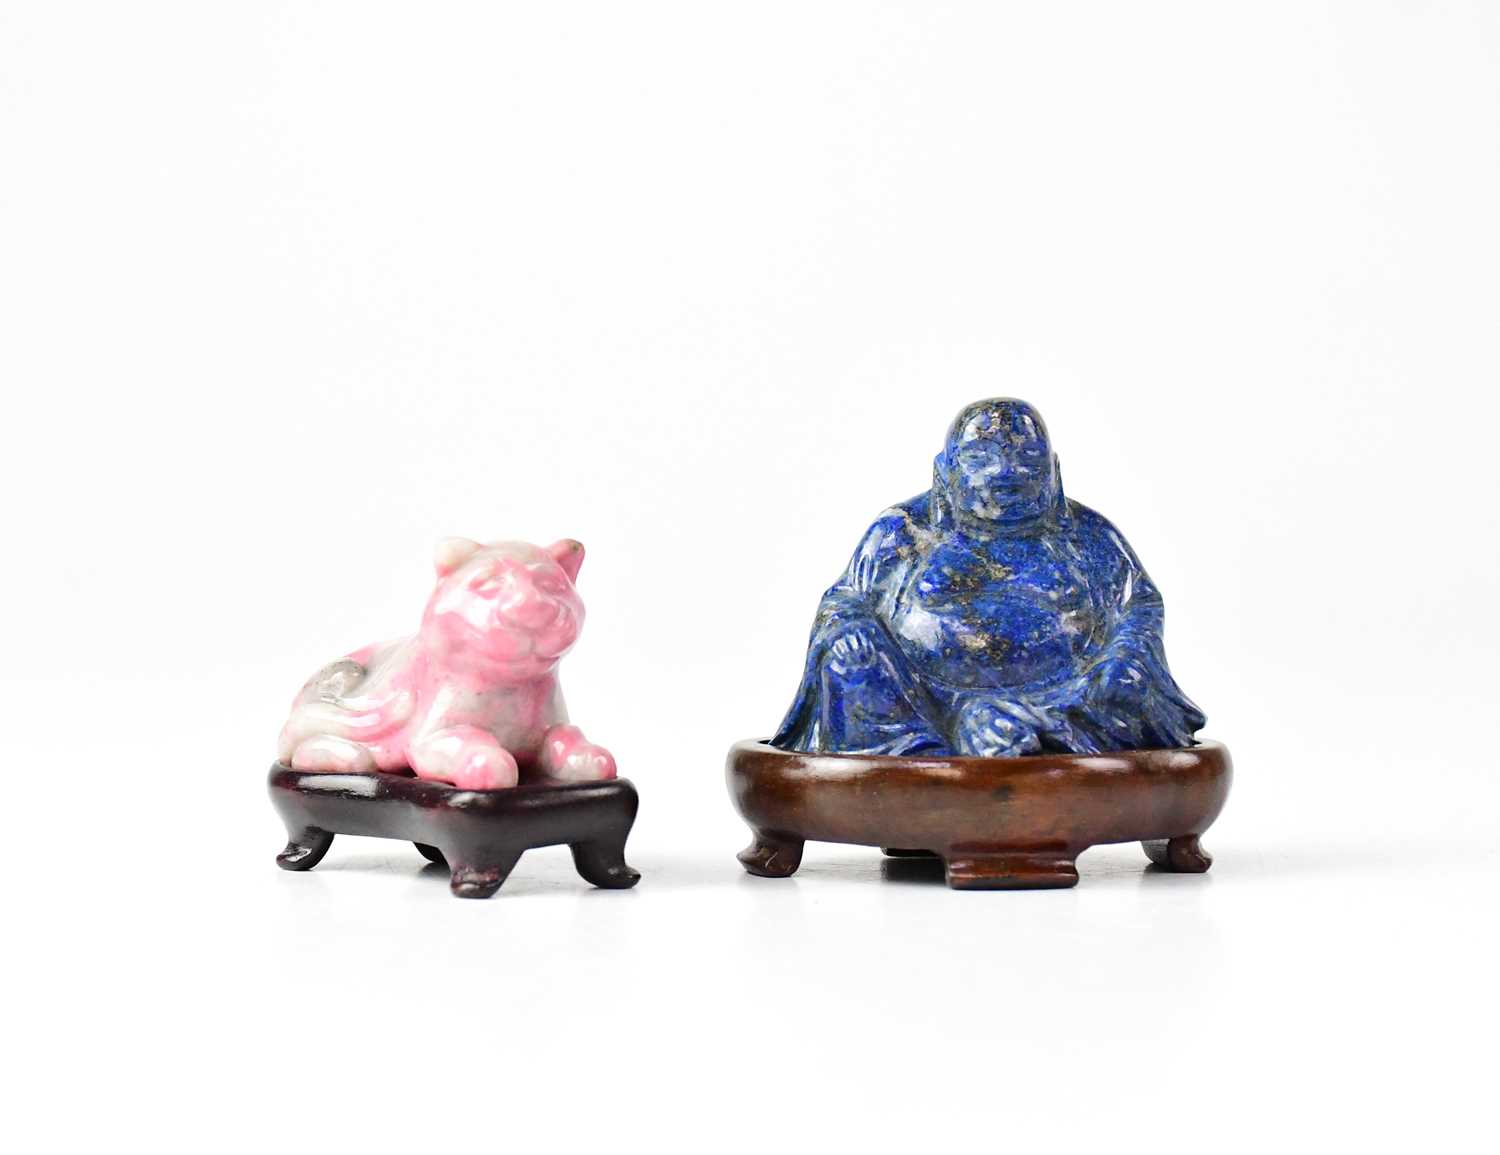 A carved lapis lazuli figure of a Buddha on a wooden stand, height of figure 4.8cm, and a carving of